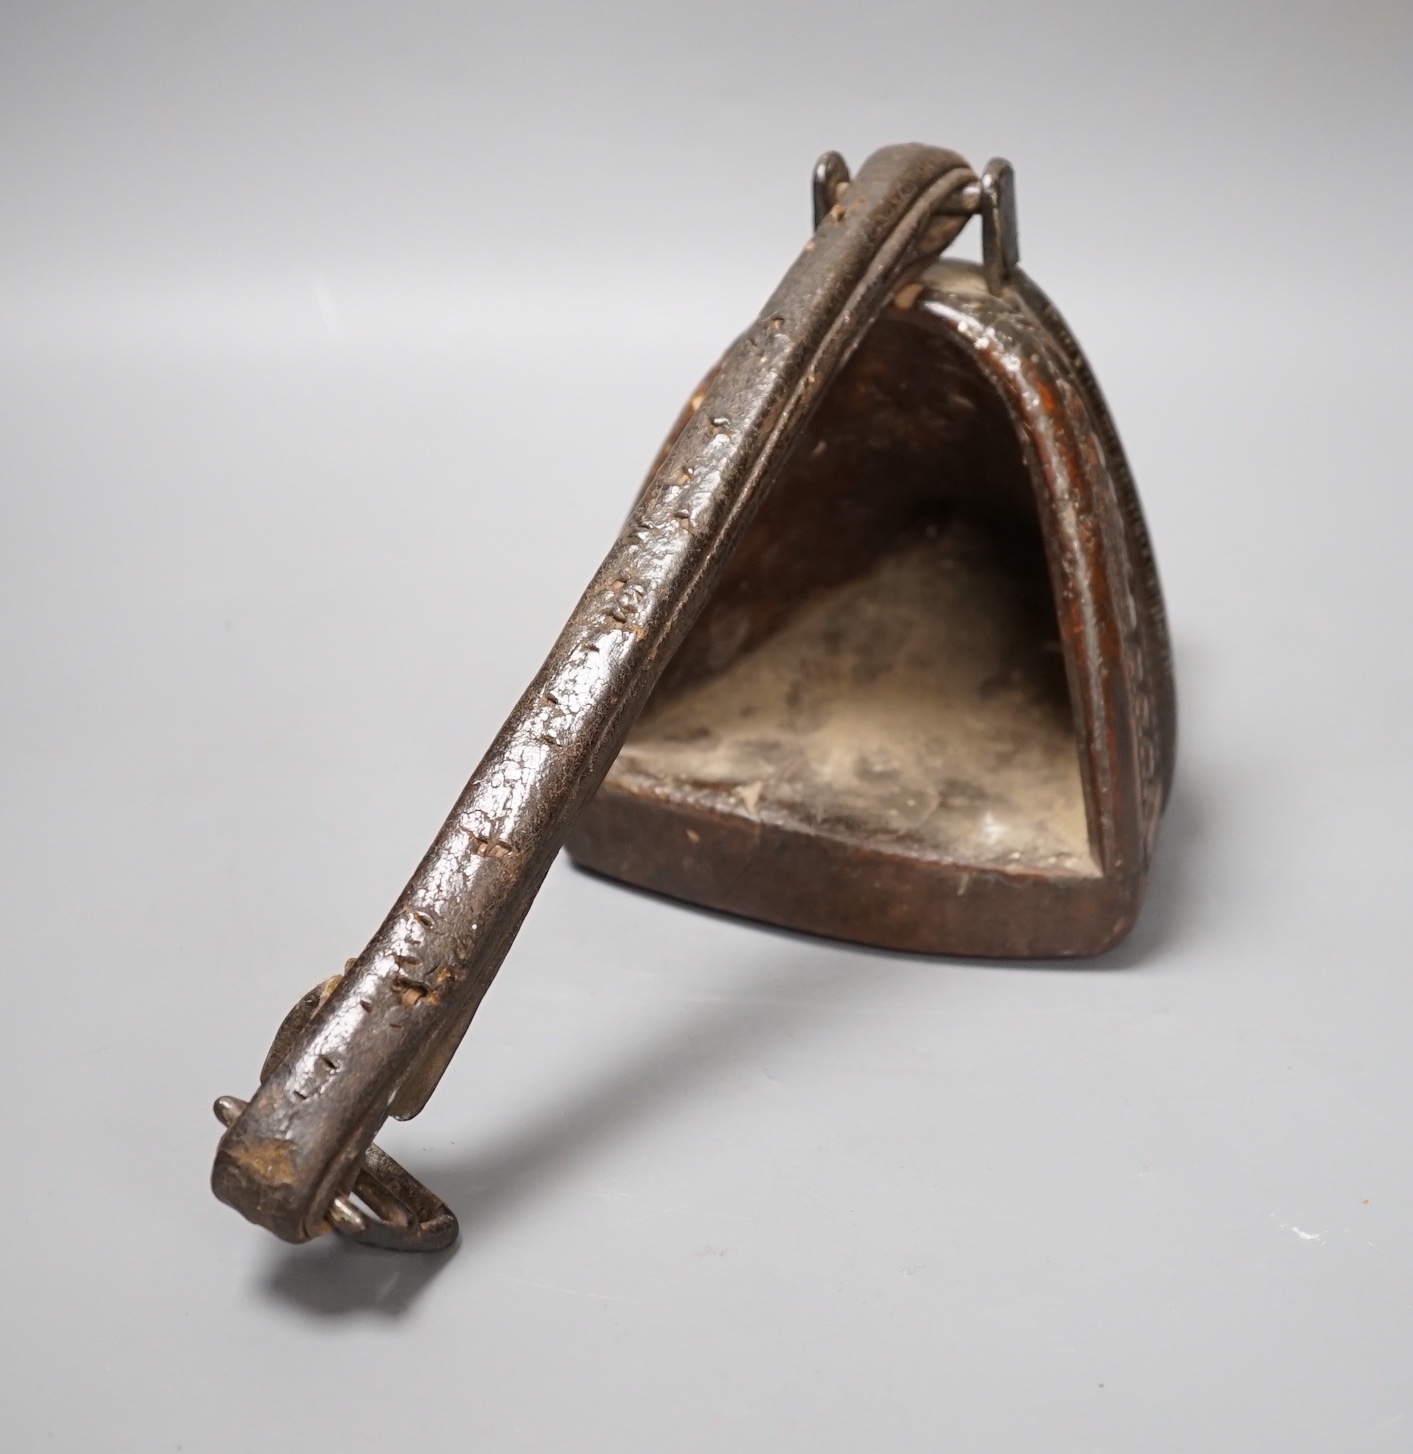 A 19th century Mongolian carved wood and bronze stirrup shoe